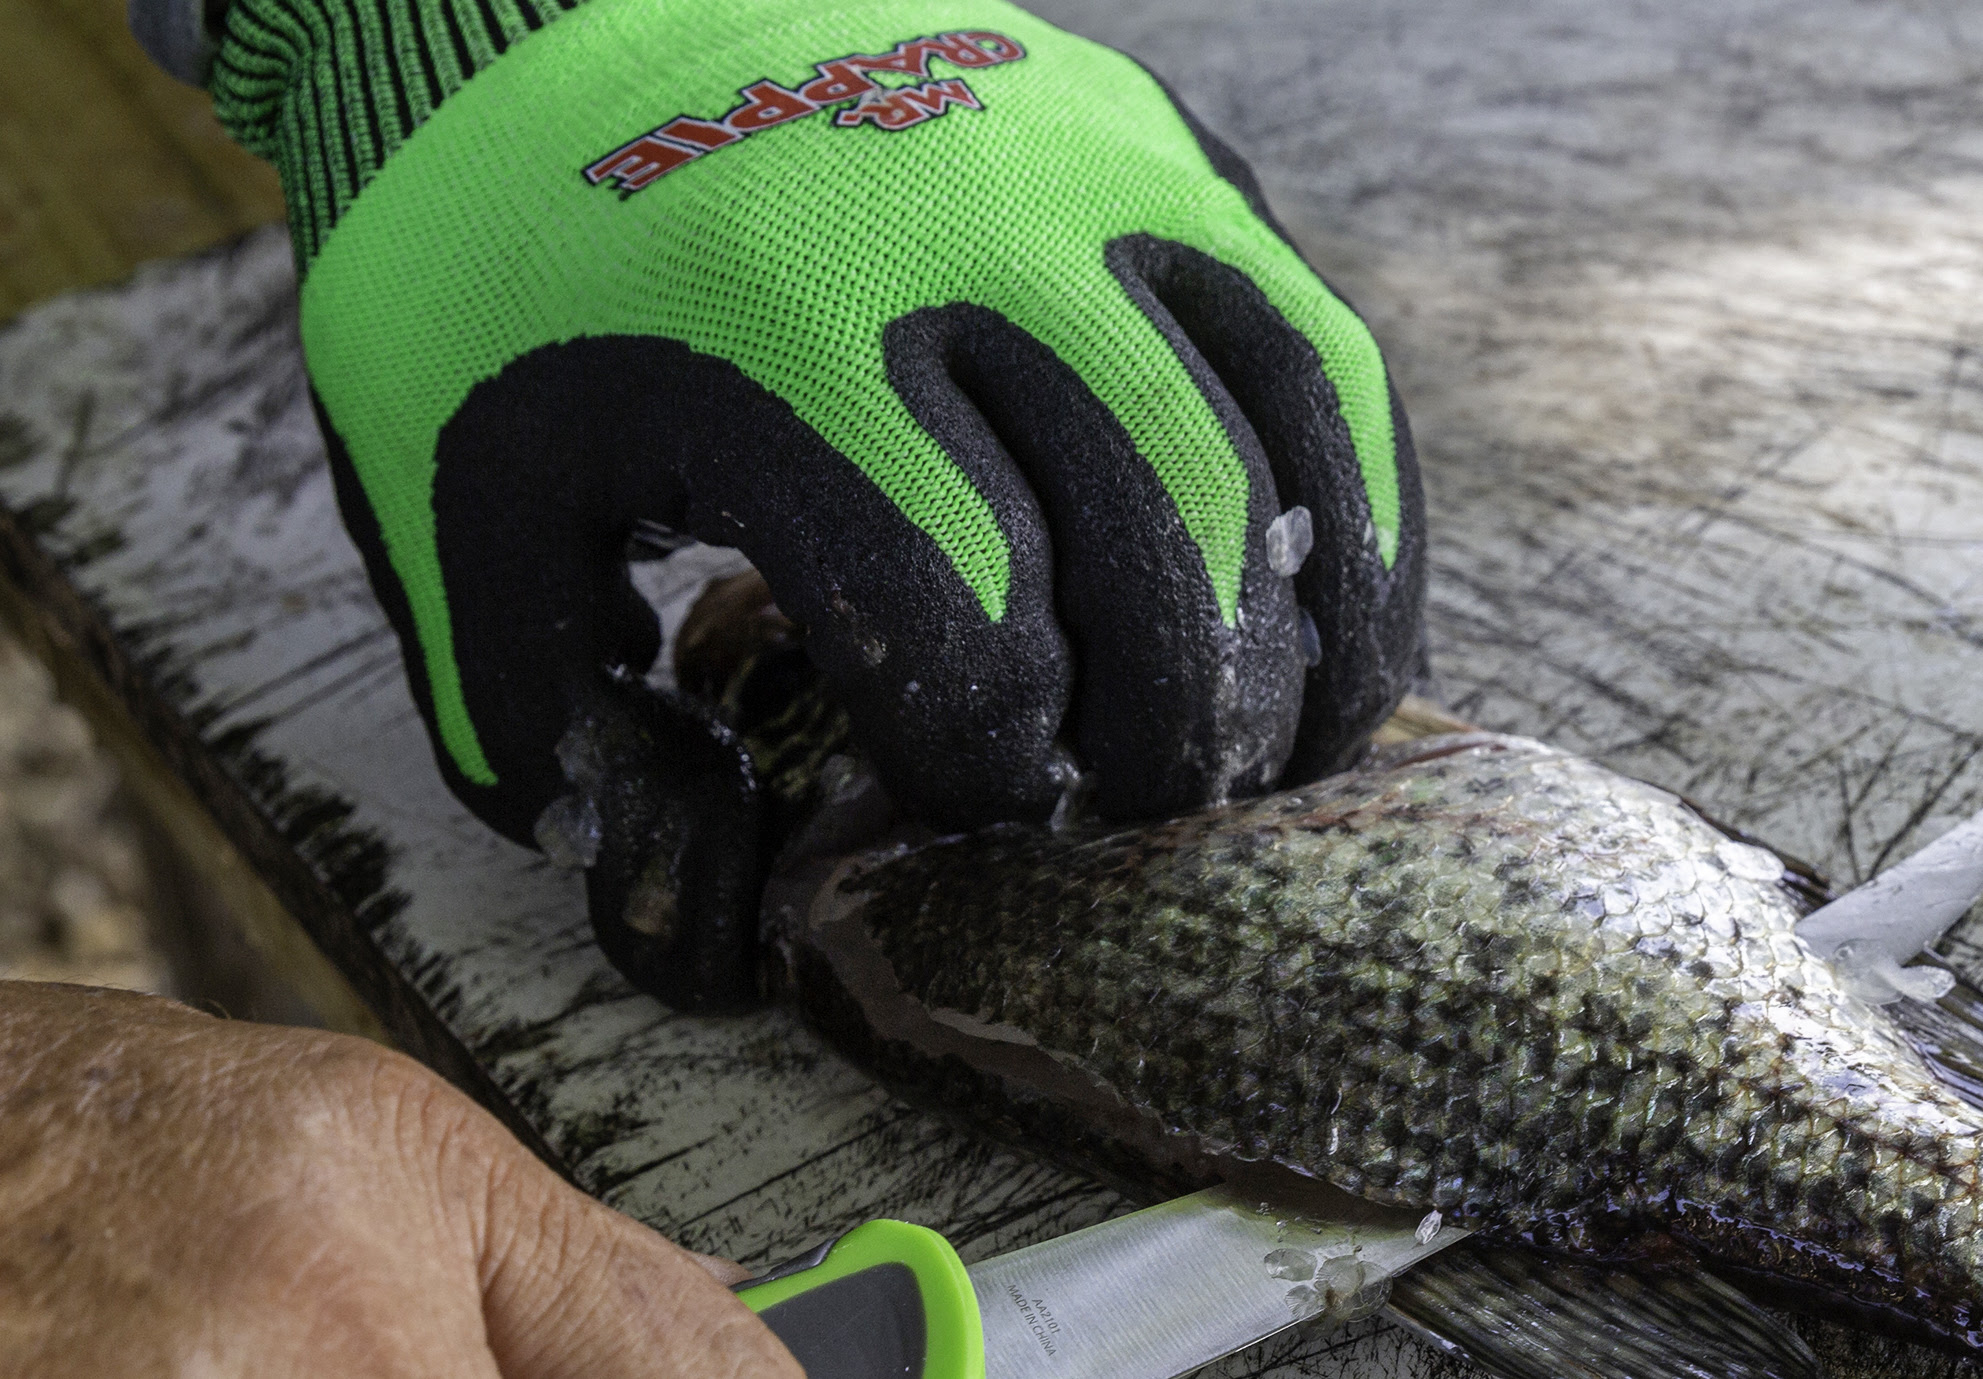 Buy Buck Mr Crappie Cut Resistant Fishing Gloves 2XL online at